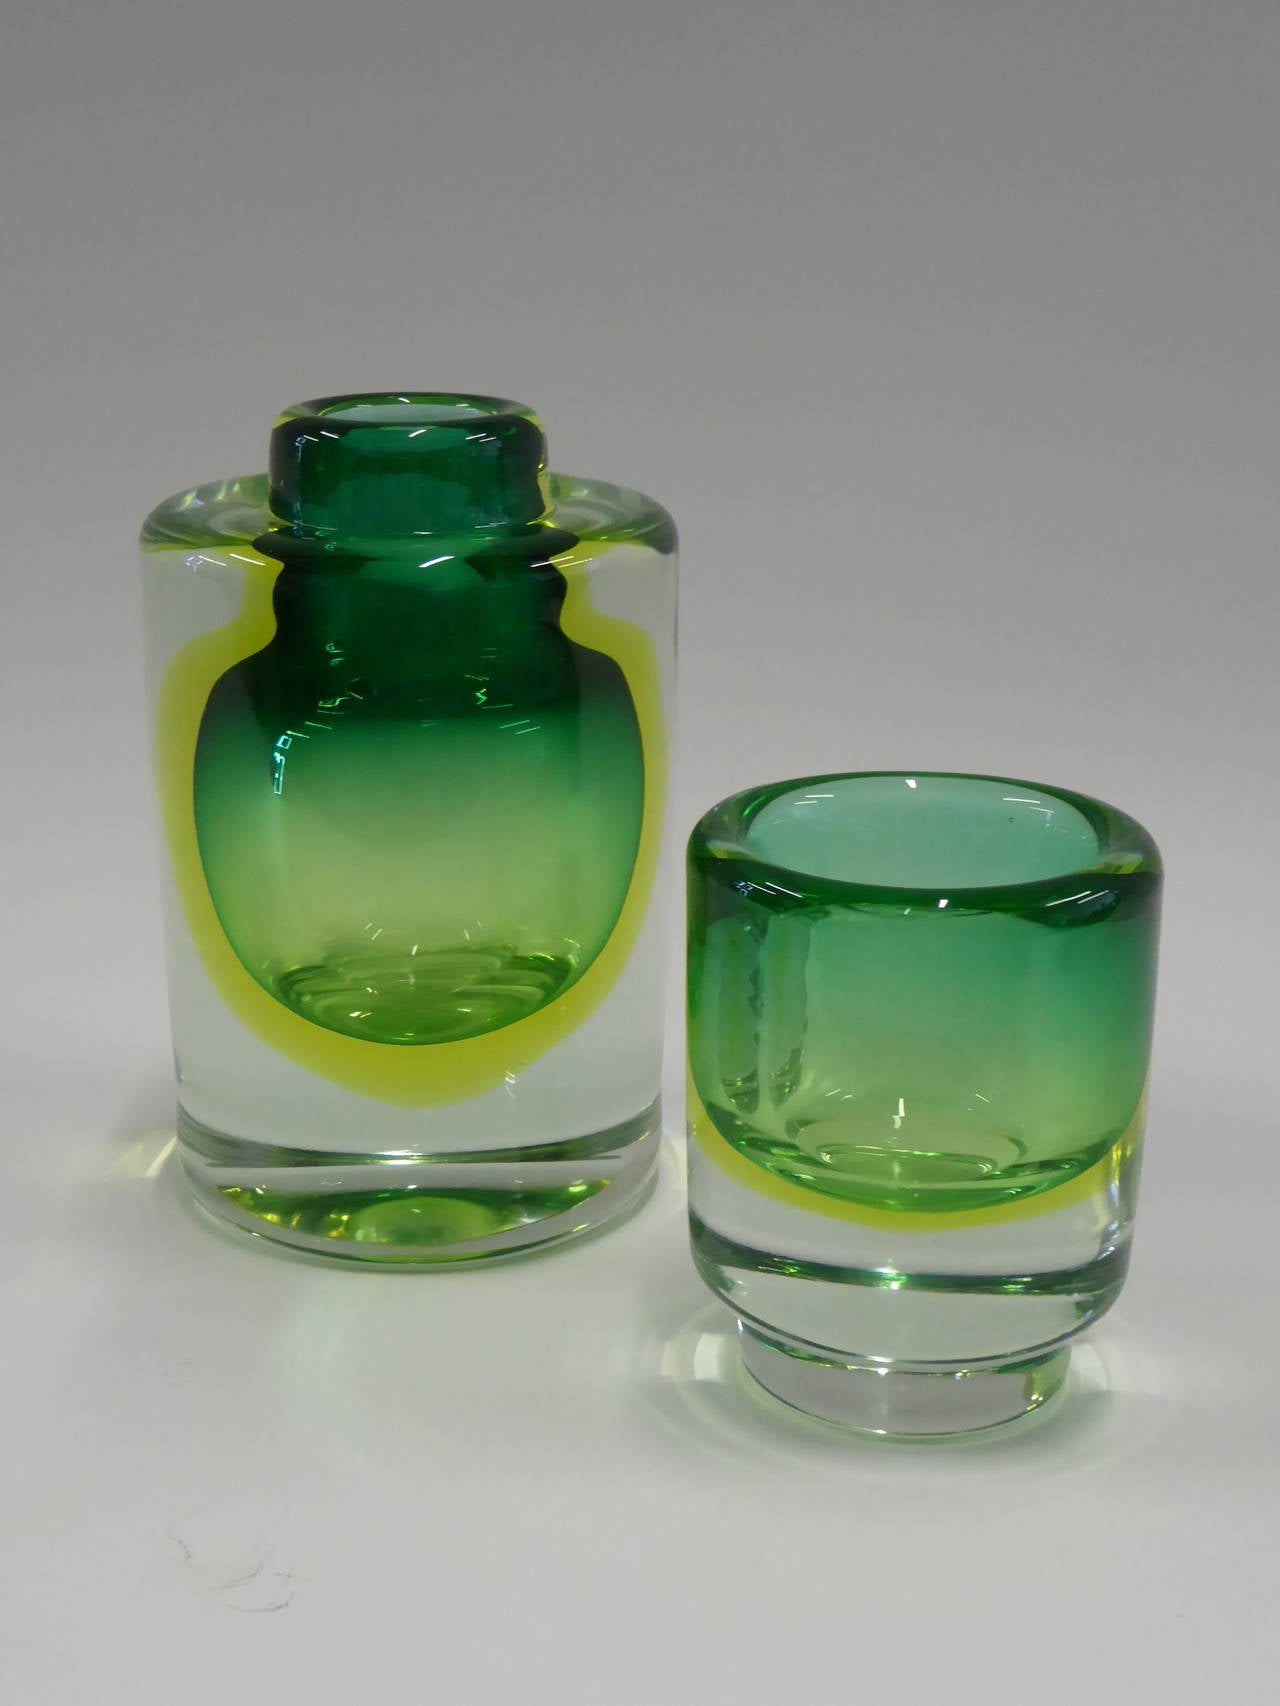 REDUCED FROM $750....Very thick walled, these Cenedese Sommerso vessels have a green casing and a uranium glass layer that adds a aura and glow to the pieces especially under black light. Flawless thick very heavy polished pieces. Nice Murano!

A